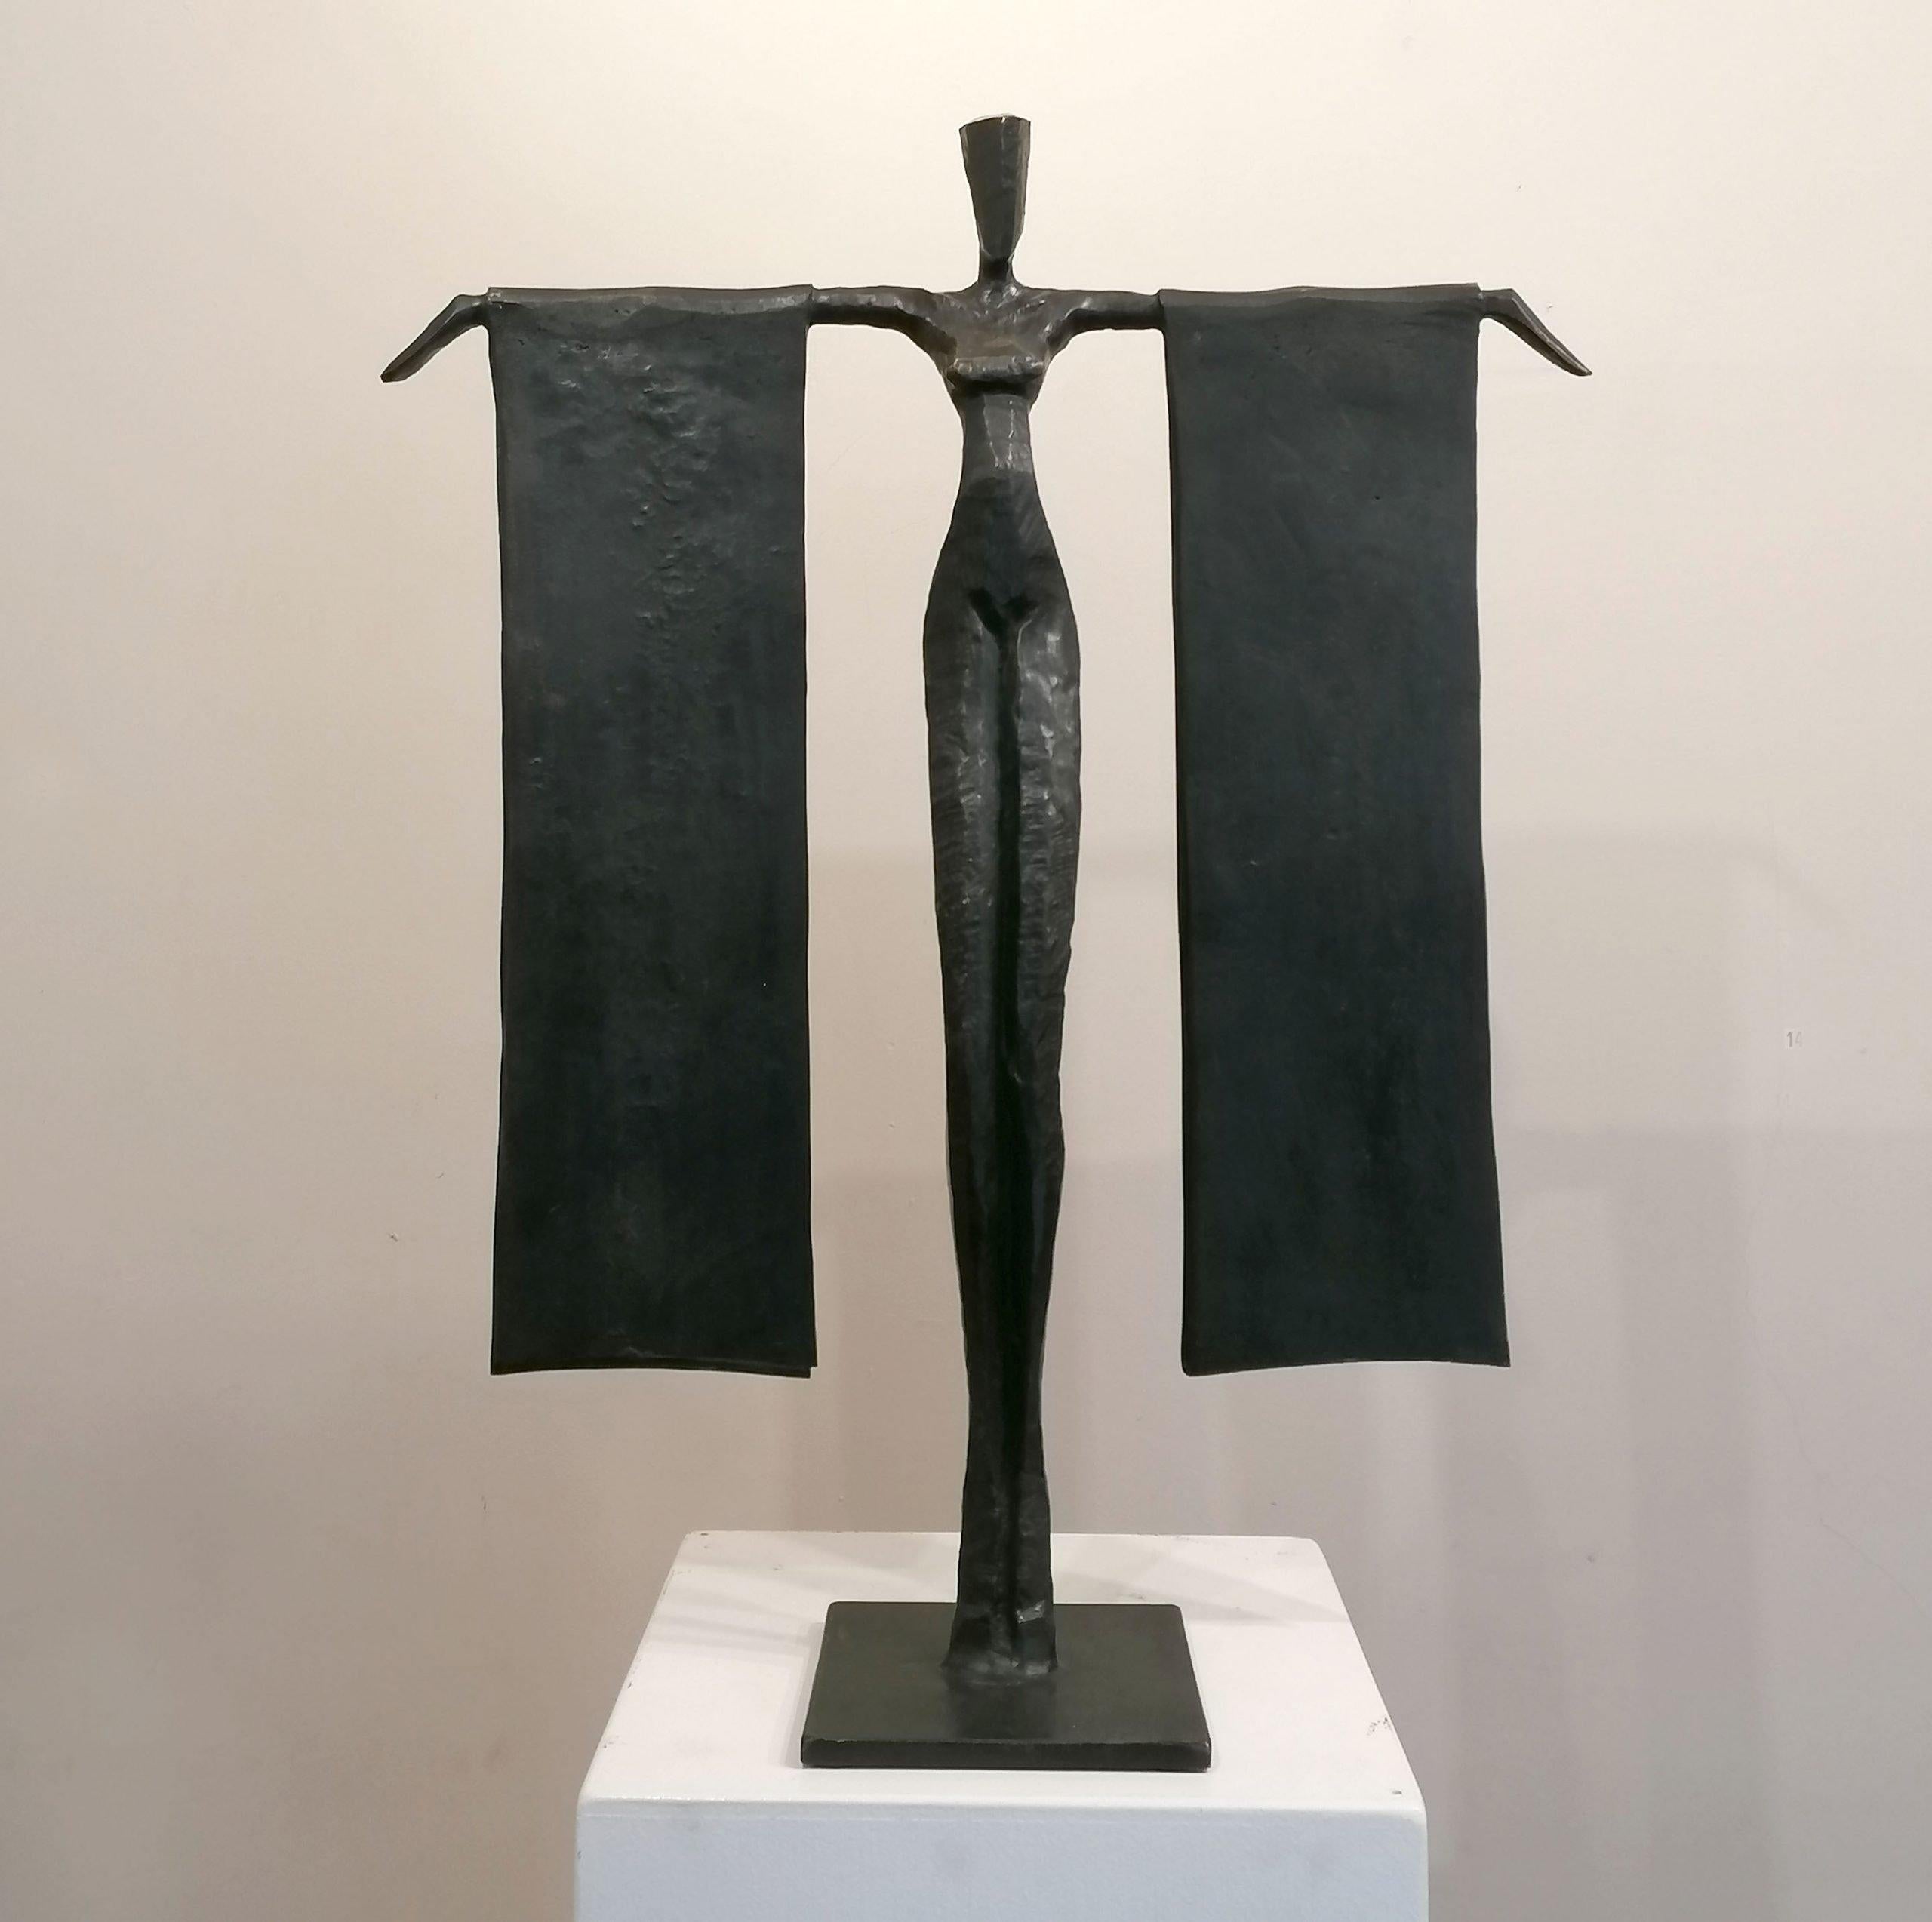 Magdalena II is an elegant figurative bronze sculpture by Nando Kallweit.
Tall and elongated, with throws hanging from outstretched arms, this is a beautiful piece.

Modelled on modern youthful postures but with a nod to the importance of heritage